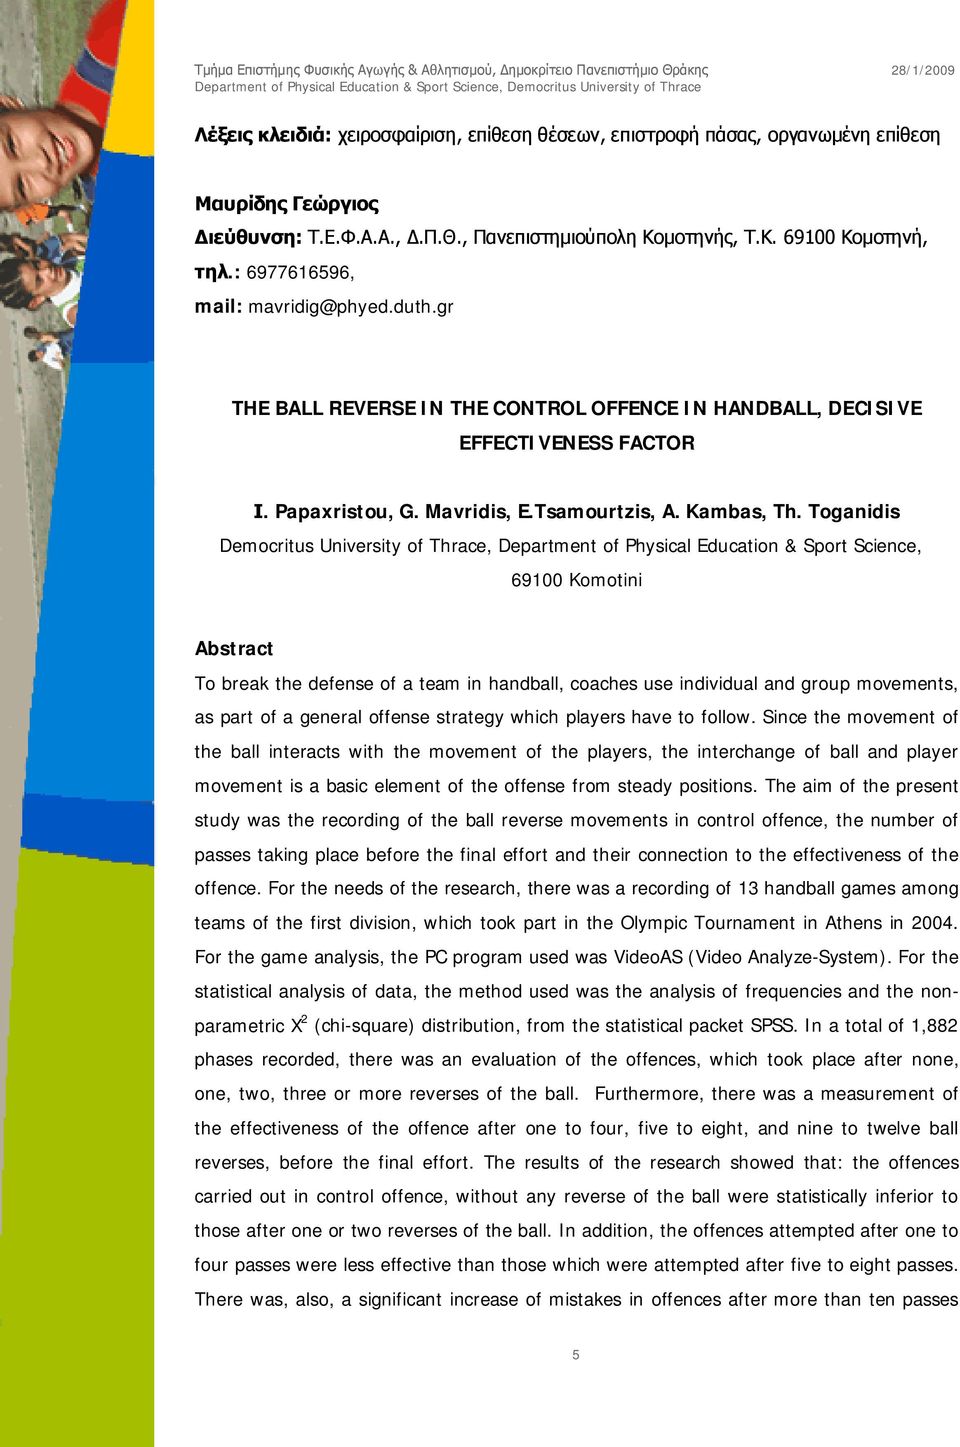 Toganidis Democritus University of Thrace, Department of Physical Education & Sport Science, 69100 Komotini Abstract To break the defense of a team in handball, coaches use individual and group